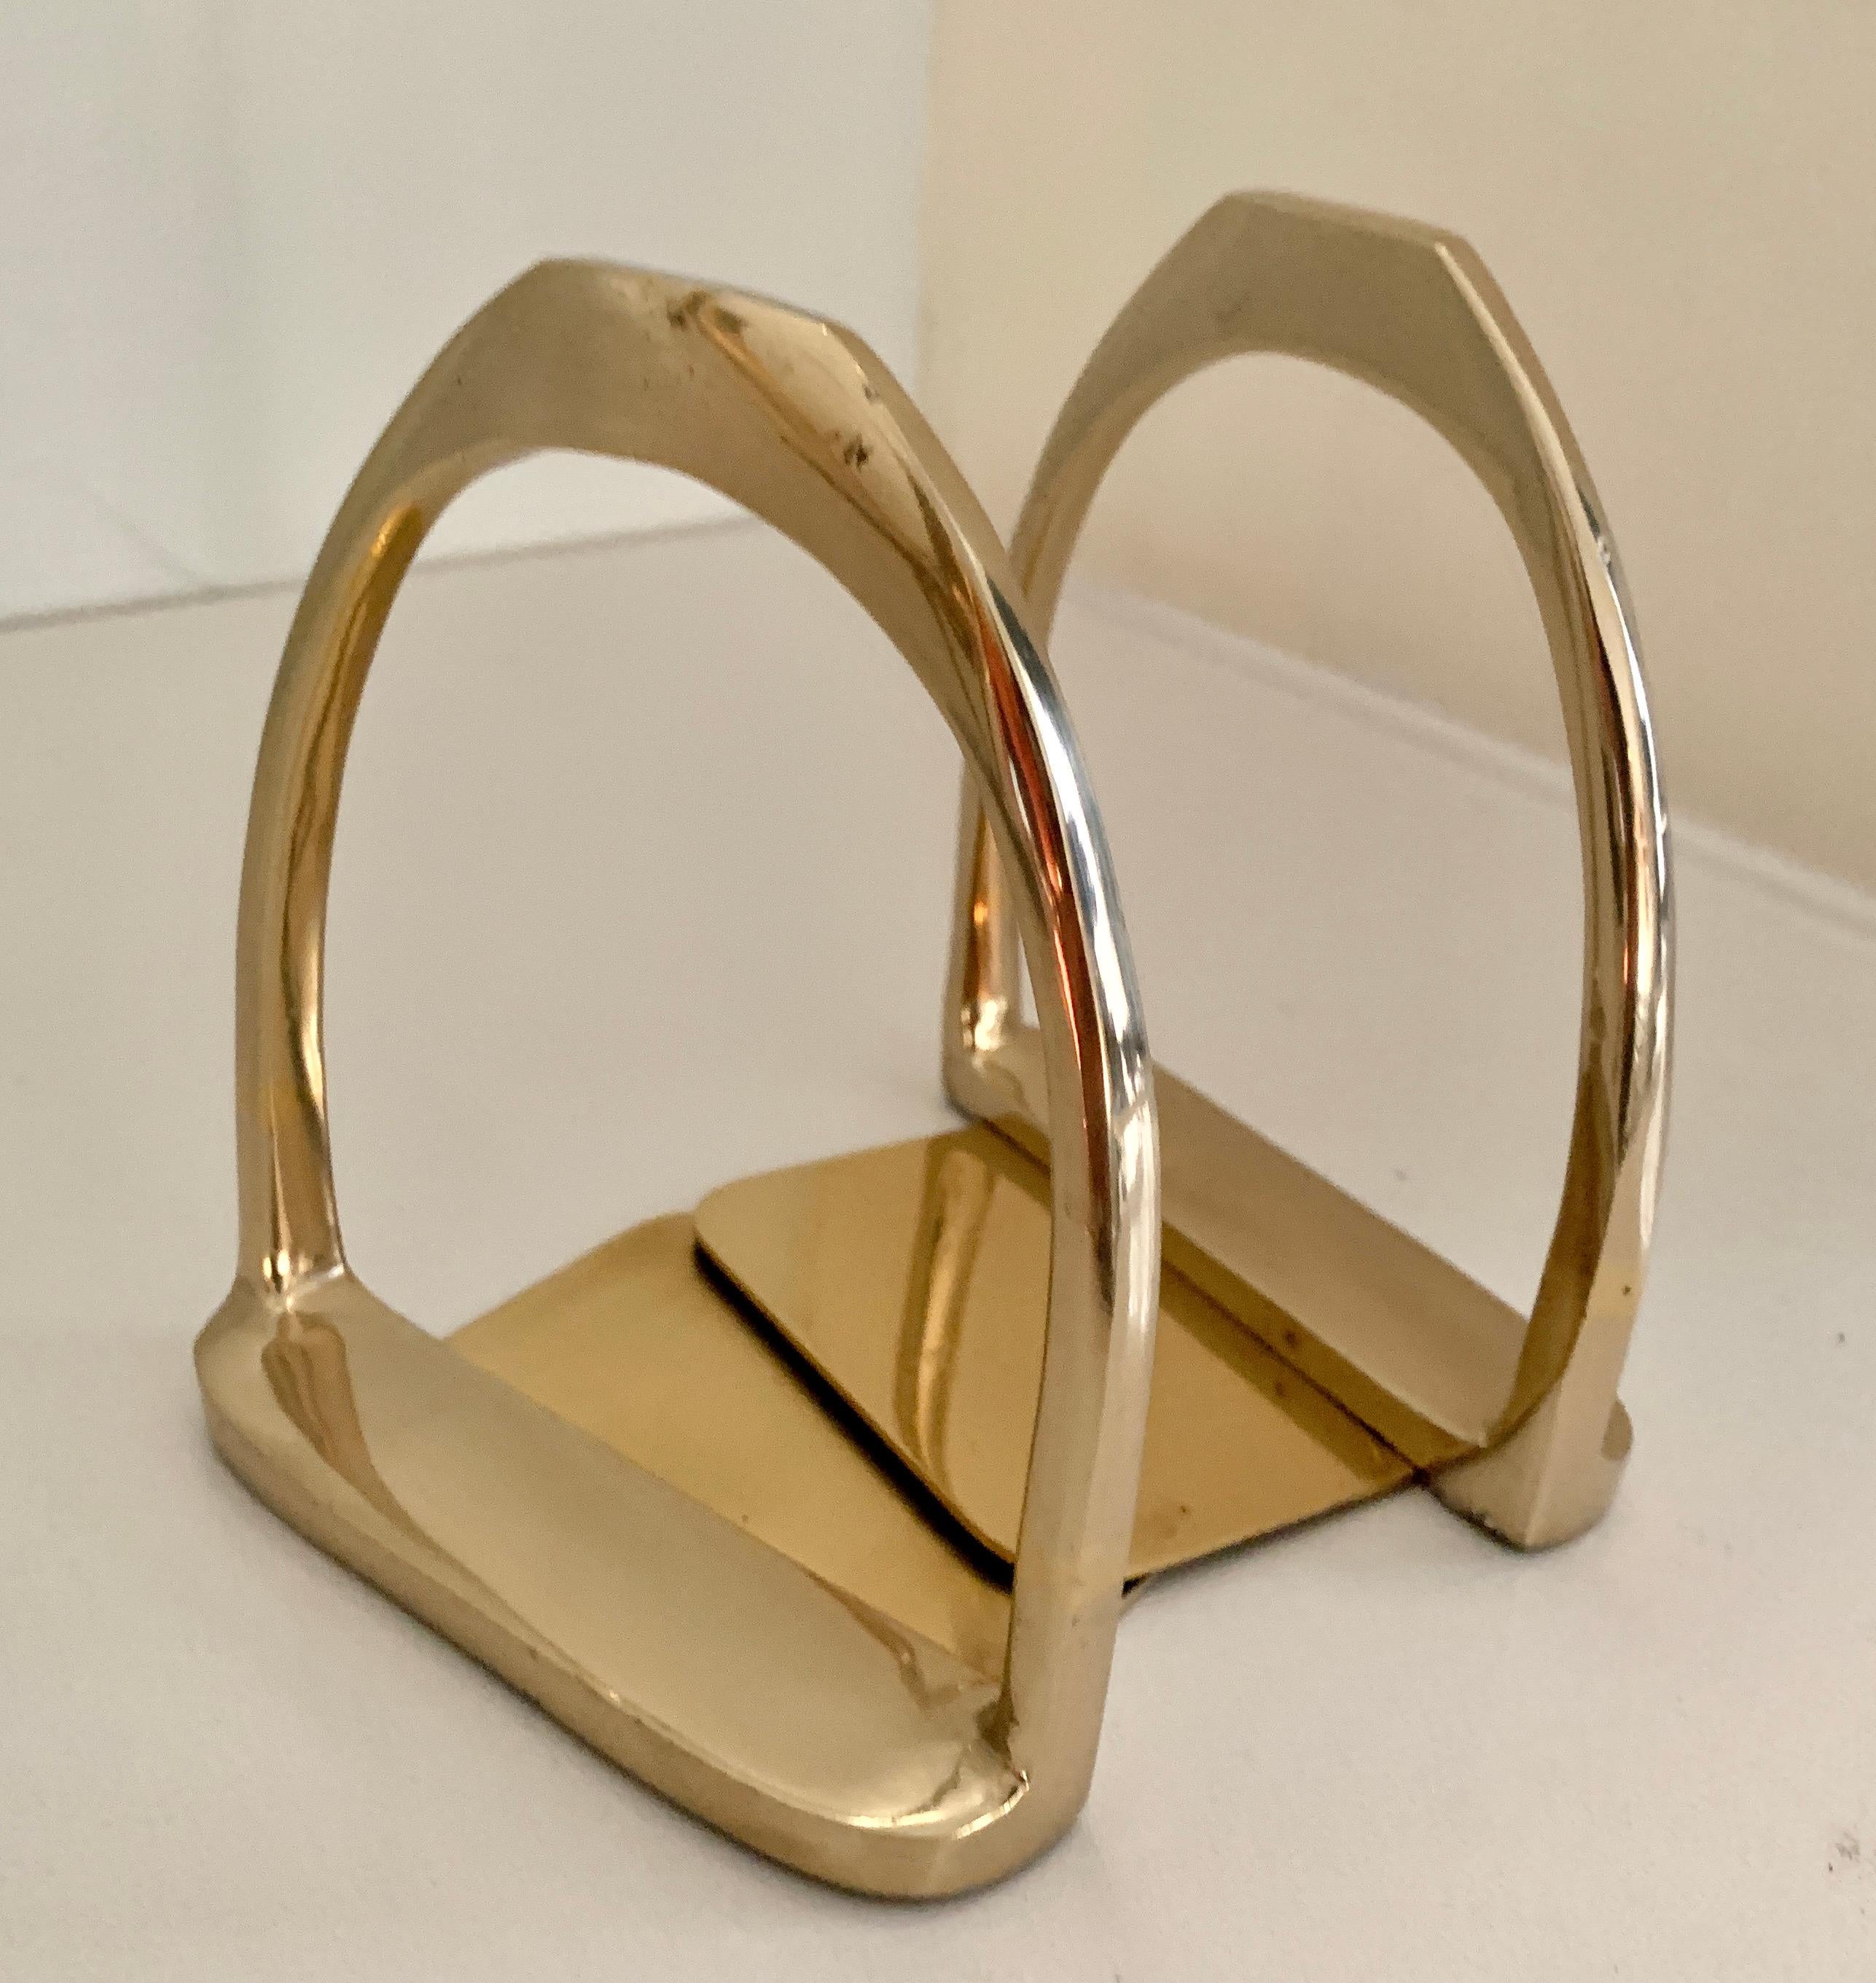 Polished Pair of Brass Horse Bit Bookends in the Style of Gucci